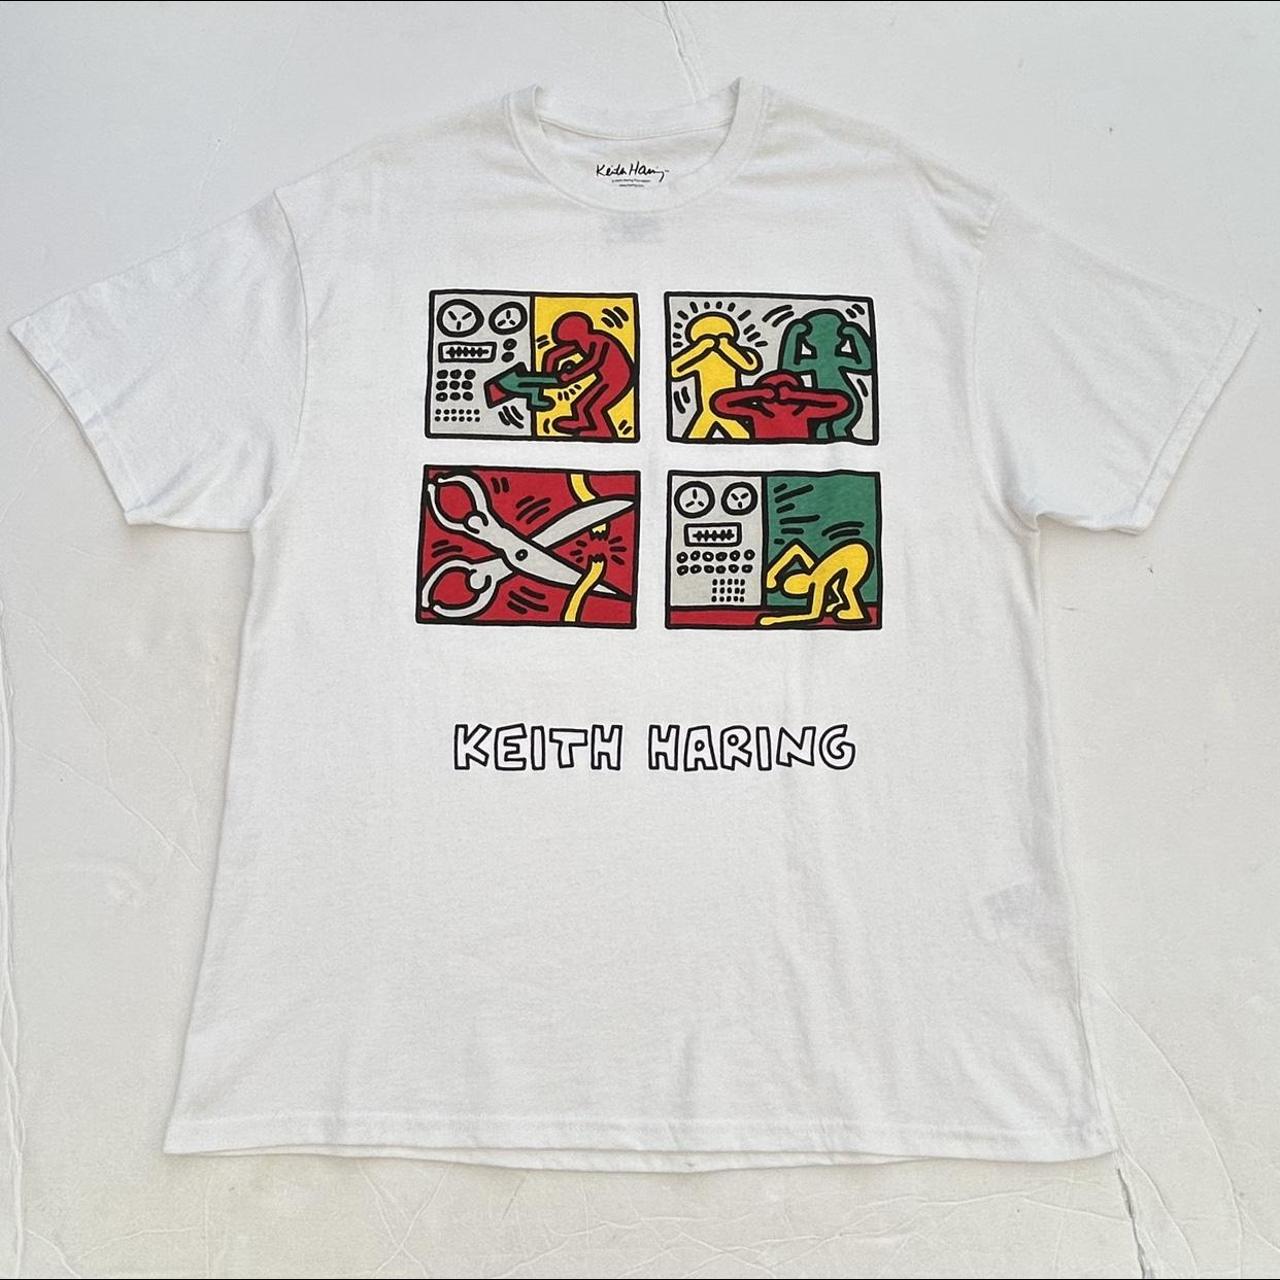 Keith Haring Pop Art Graphic T Shirt Officially... - Depop